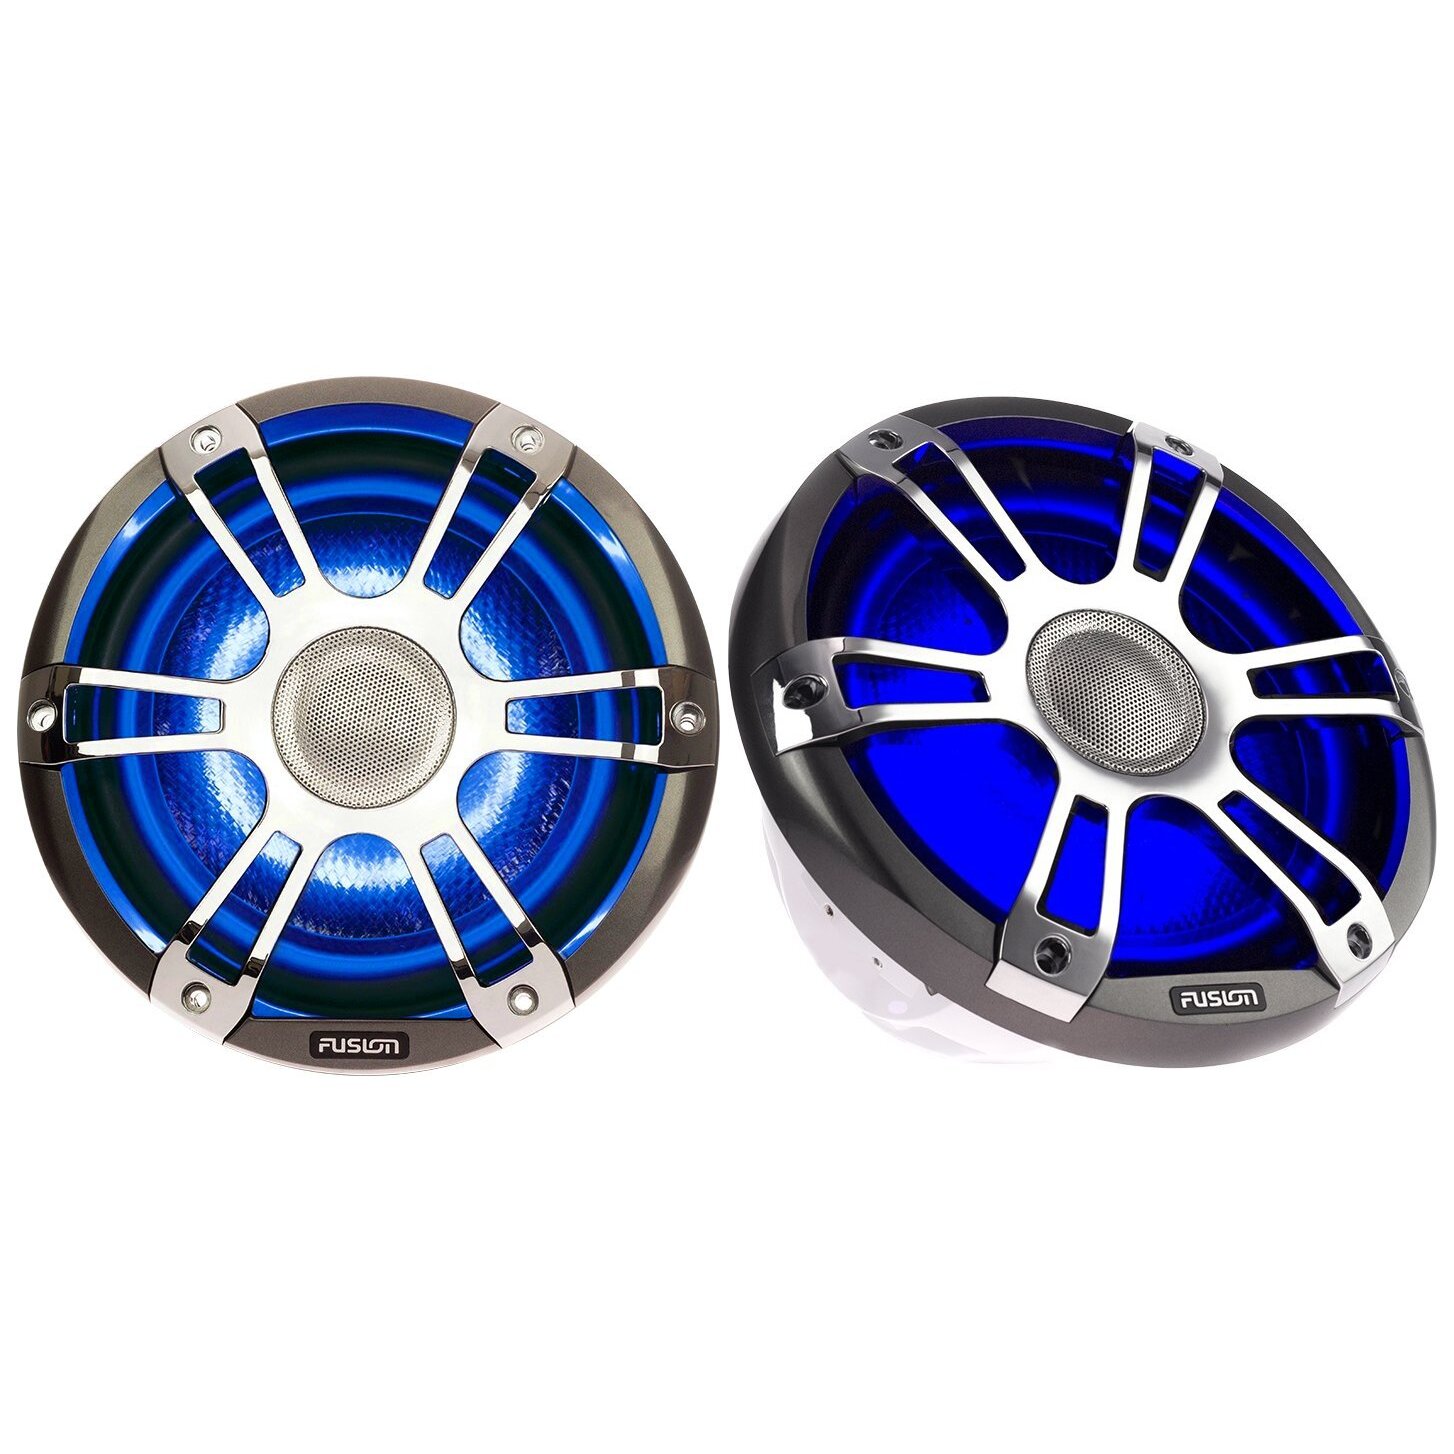 Fusion SG-CL65SPC Silver/Chrome 6.5" Signature Series 230 Watt Waterproof Marine Speakers With LED Accent Lighting